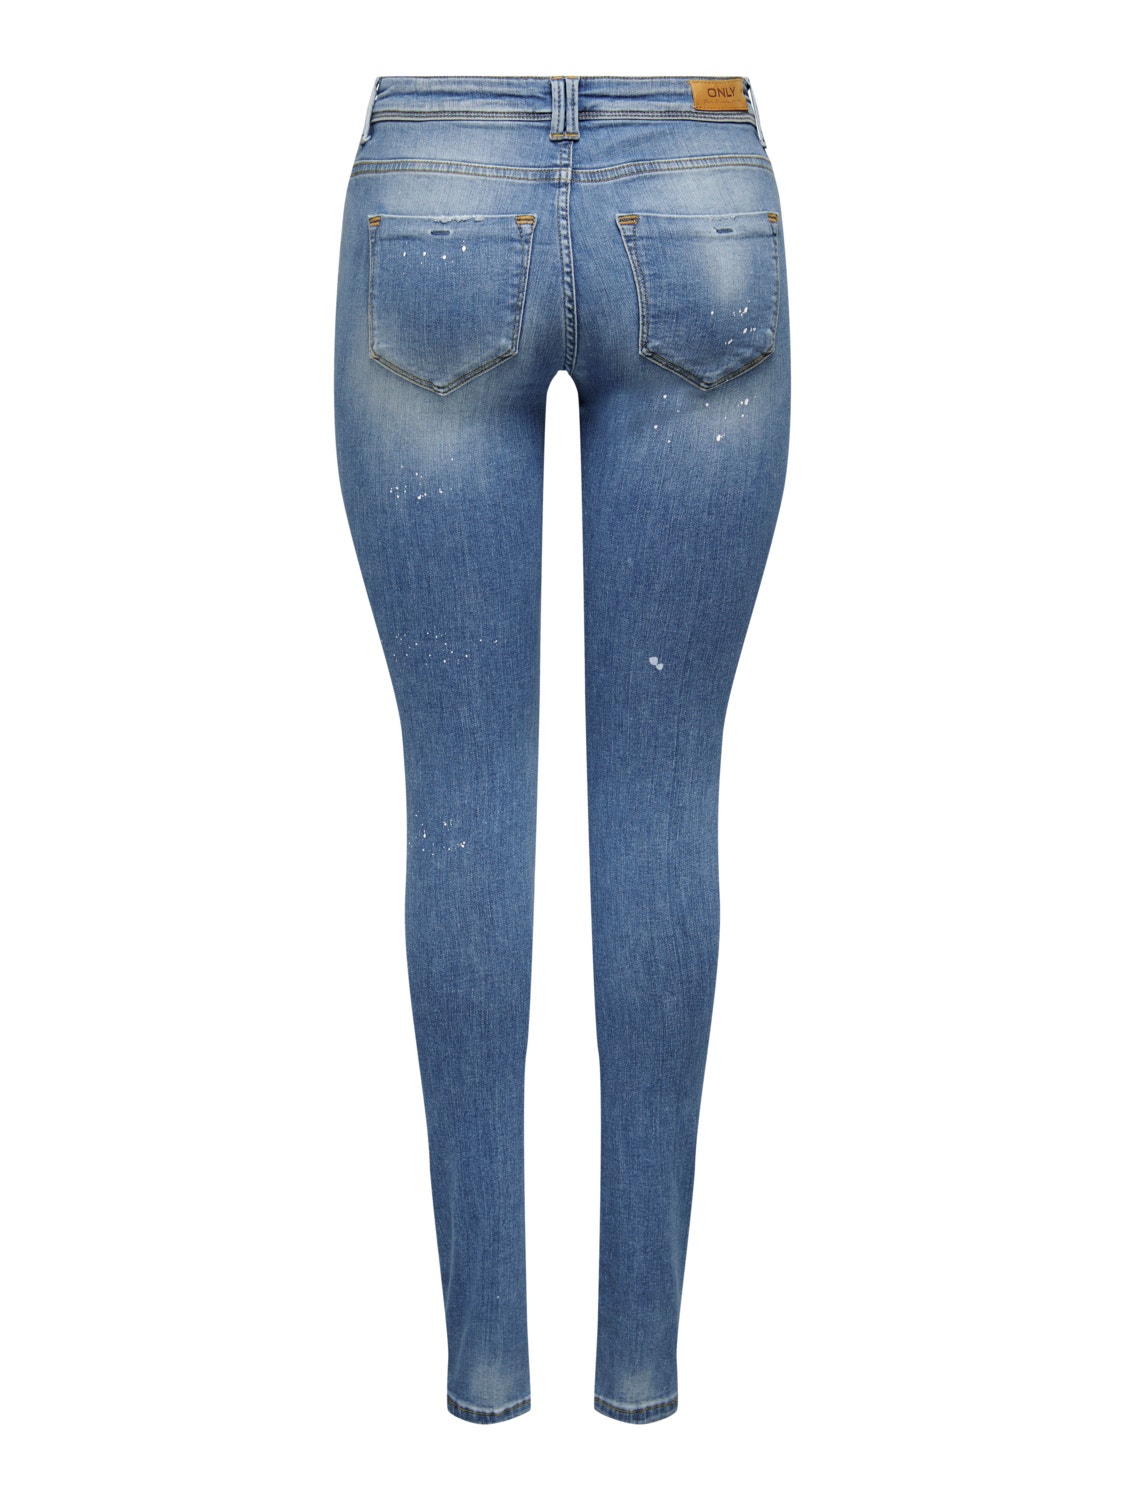 ONLY Jeans Skinny Fit Taille moyenne -Medium Blue Denim - 15259296